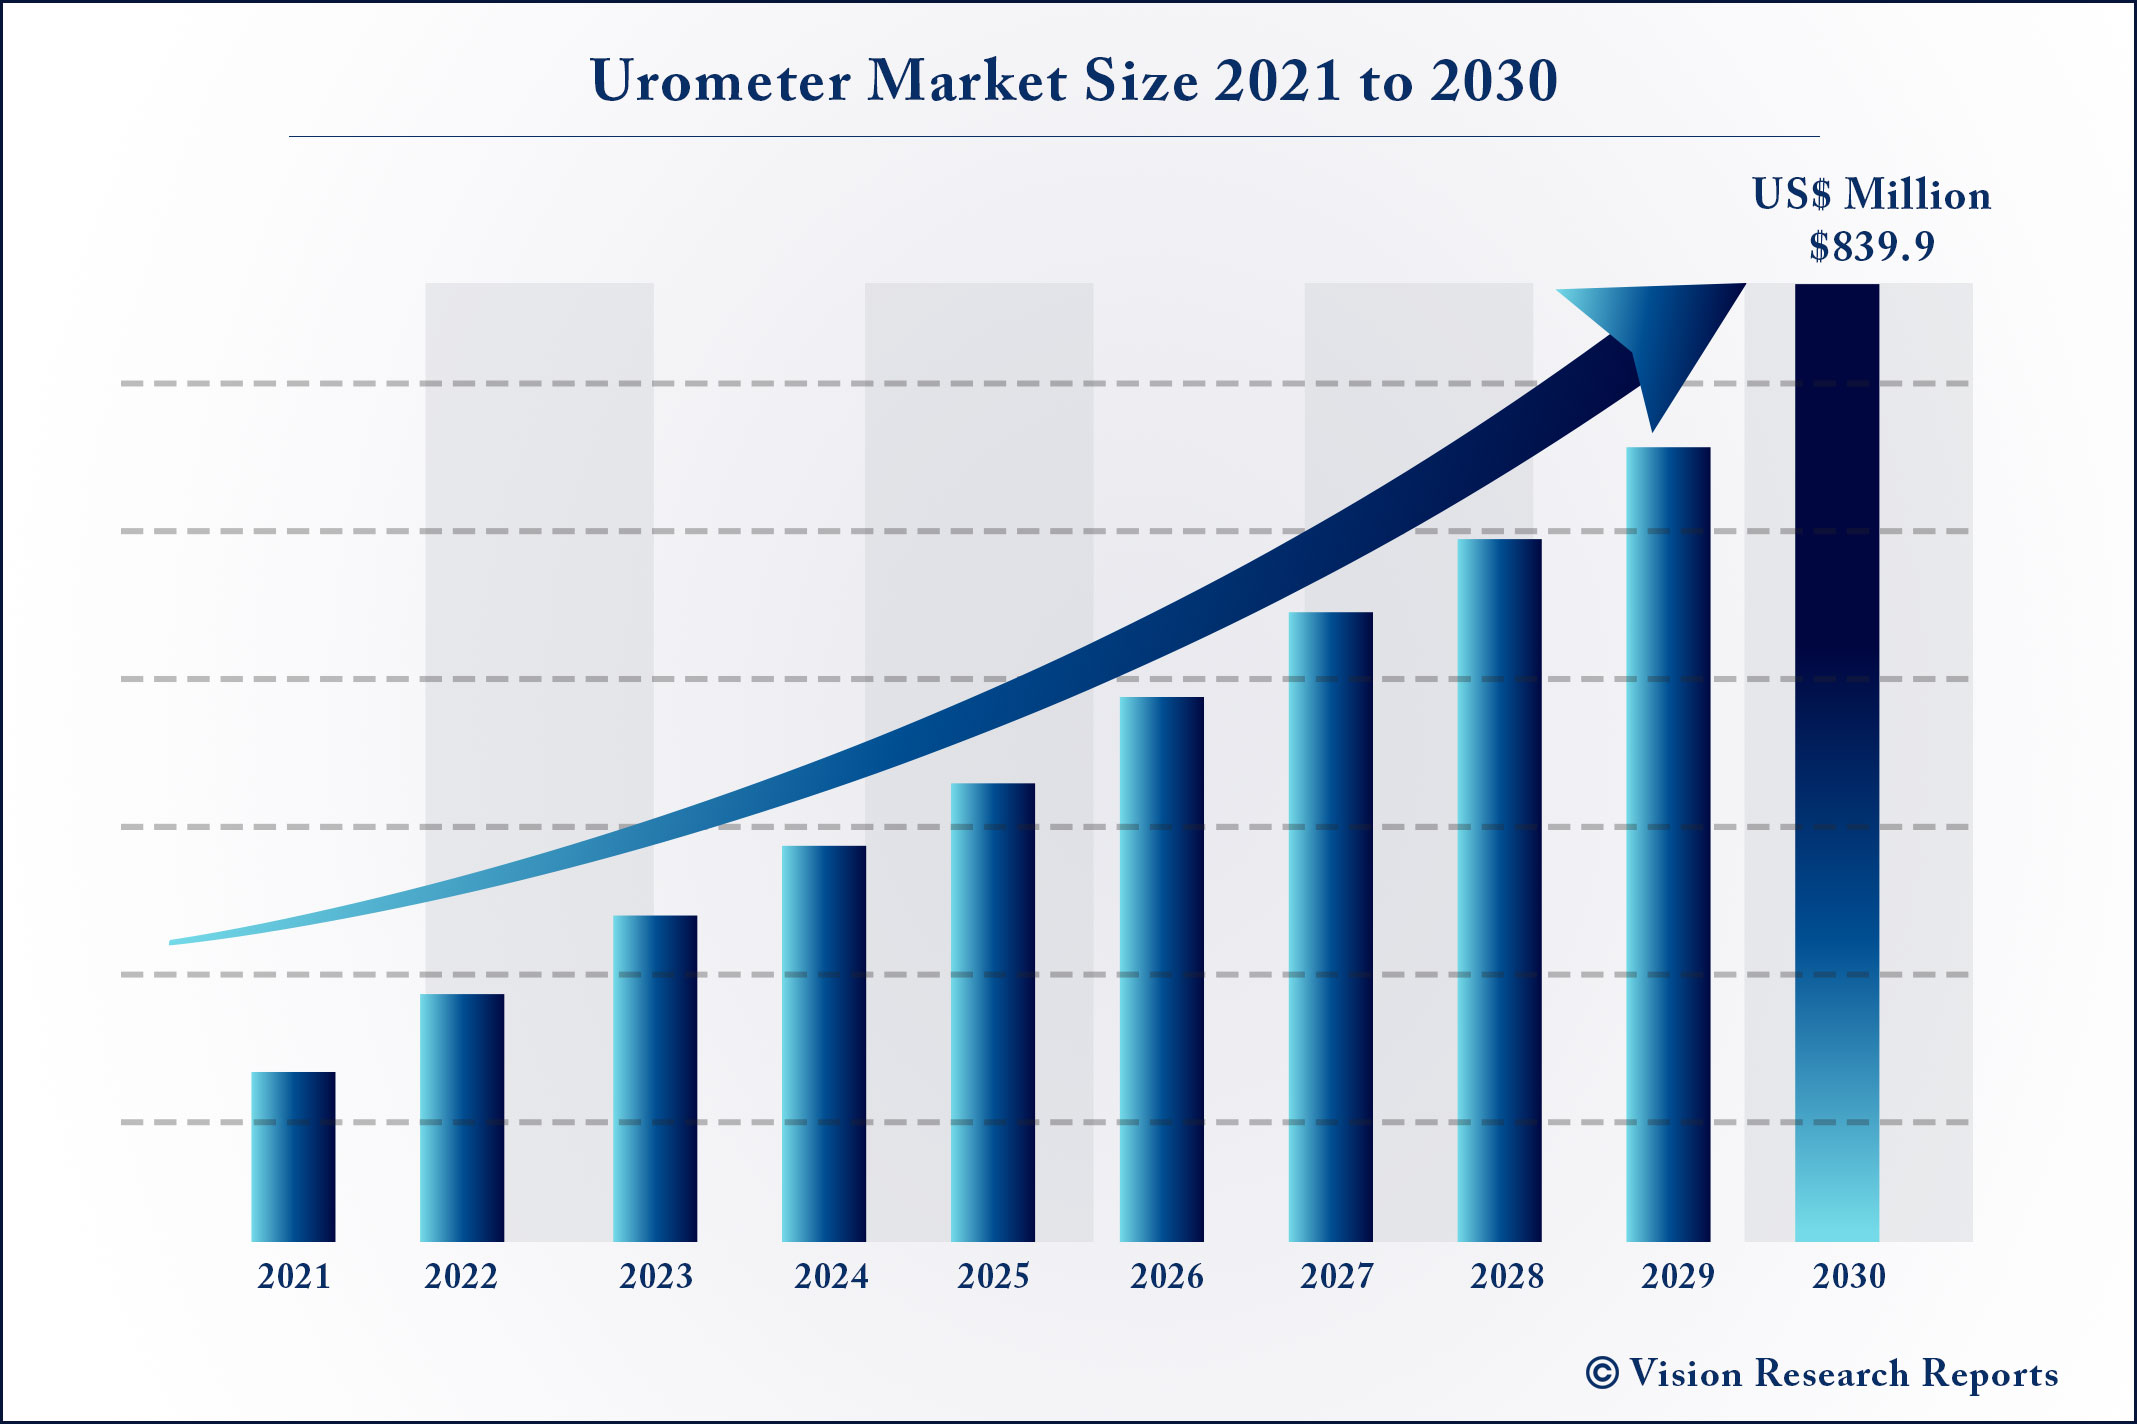 Urometer Market Size 2021 to 2030